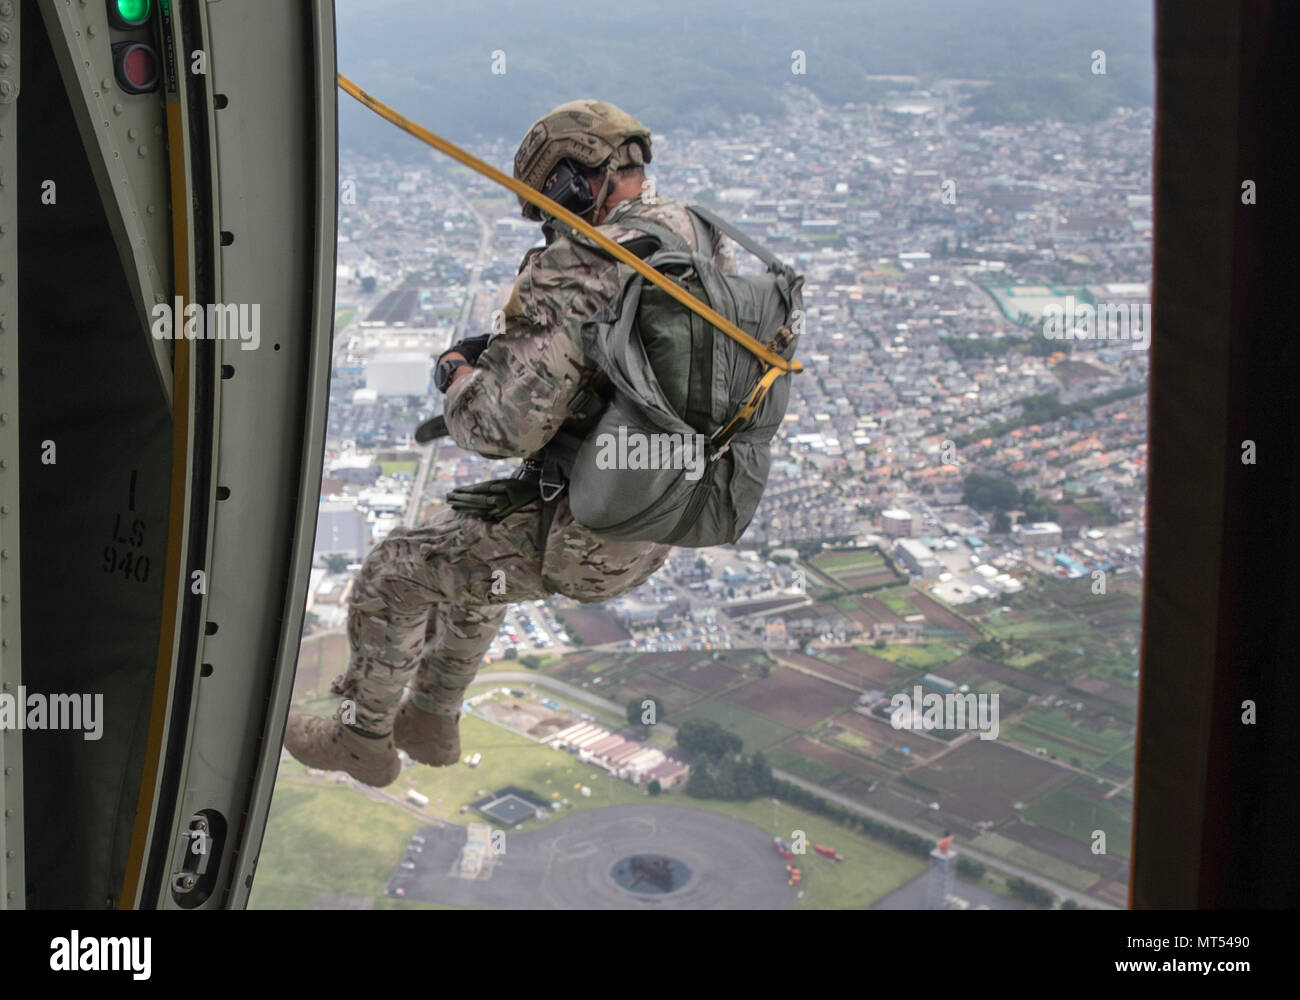 Tech. Sgt. Seth Sarrett, 374th Operations Support Squadron survival, evasion, resistance and escape specialist, jumps out of a C-130J Super Hercules during a training mission over Yokota Air Base, Japan, July 28, 2017. The training not only allowed the SERE to practice jumping, but it also allowed the Yokota aircrews to practice personnel drops and maintaining their qualifications. (U.S. Air Force photo by Yasuo Osakabe) Stock Photo